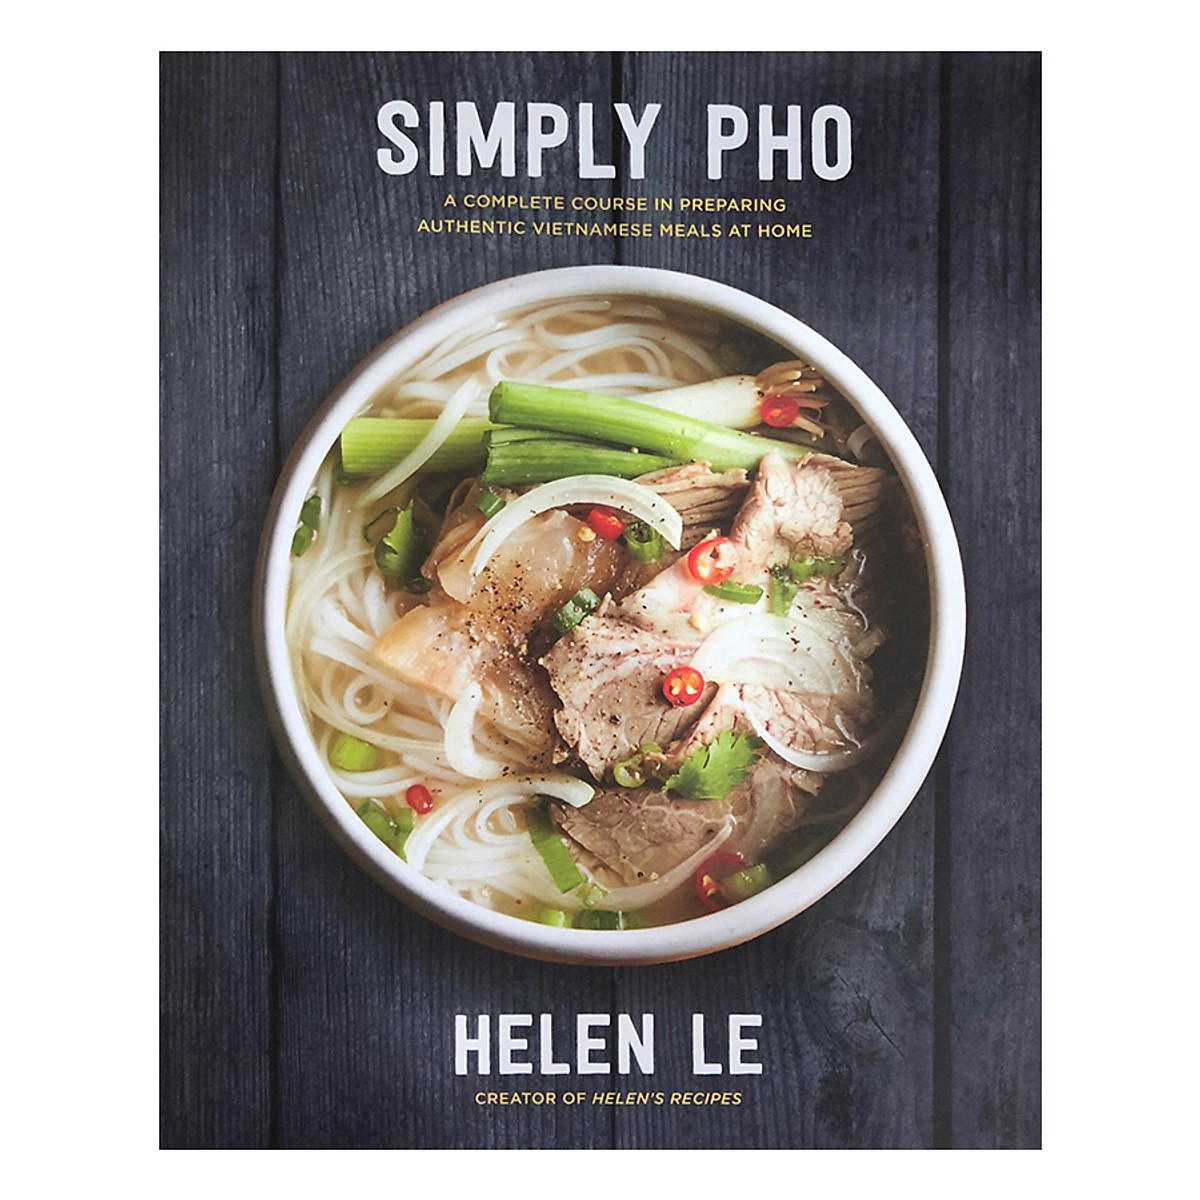 Simply Pho (A Complete Course in Preparing Authentic Vietnamese Meals at Home)